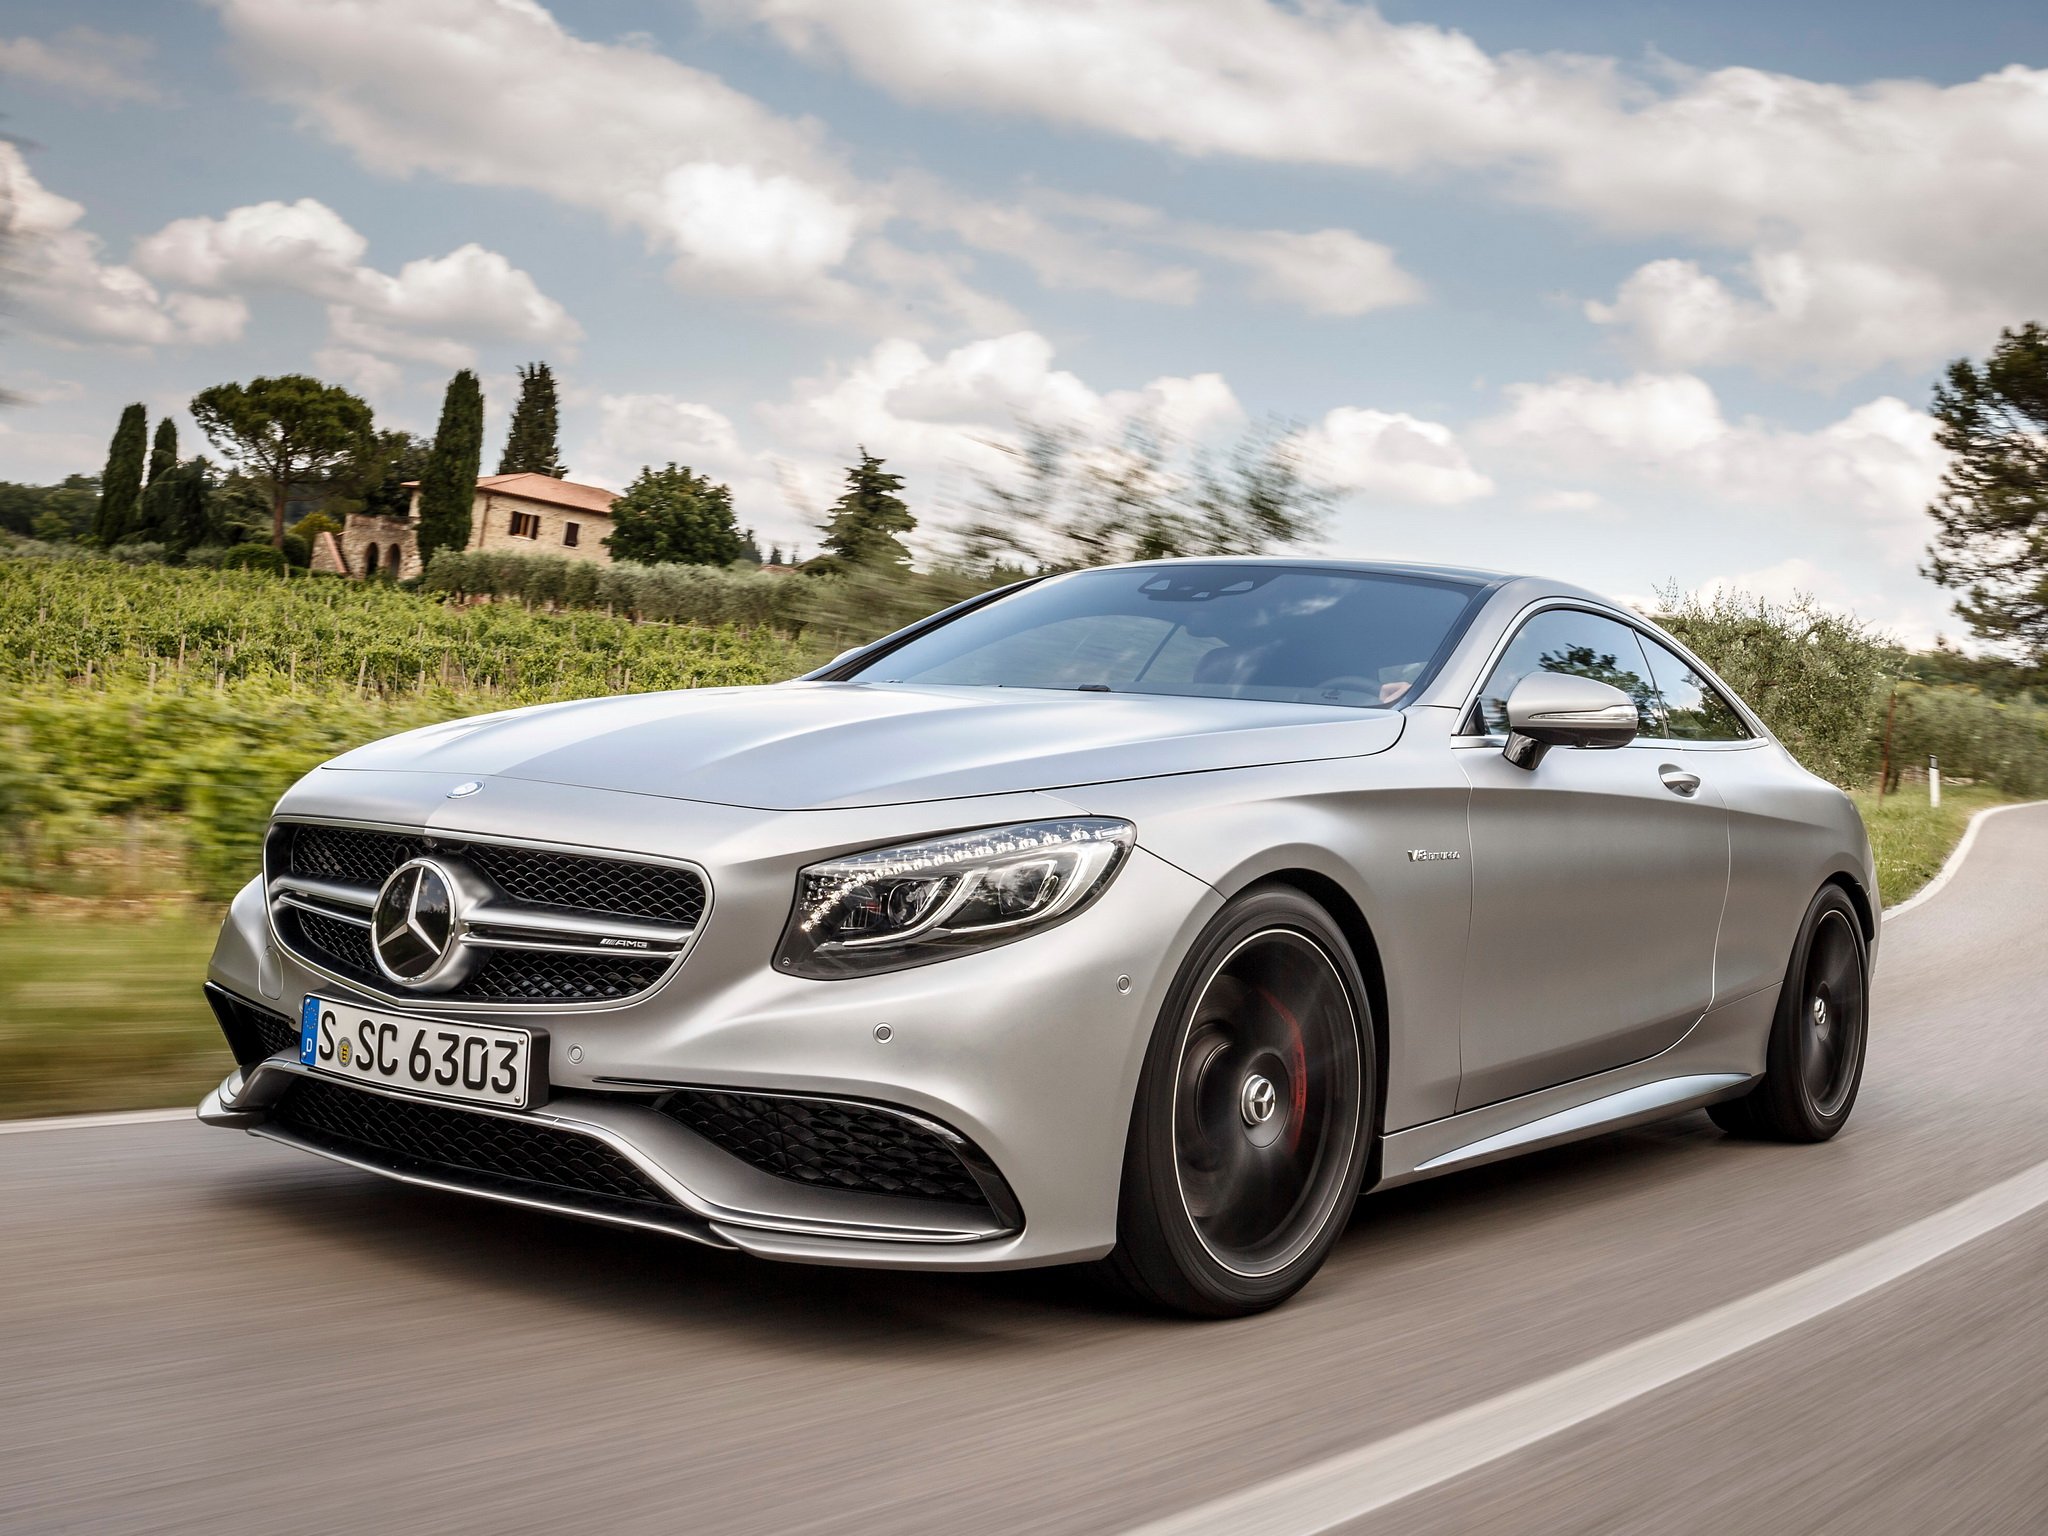 2014, Mercedes, Benz, S63, Amg, Coupe, C217 Wallpaper